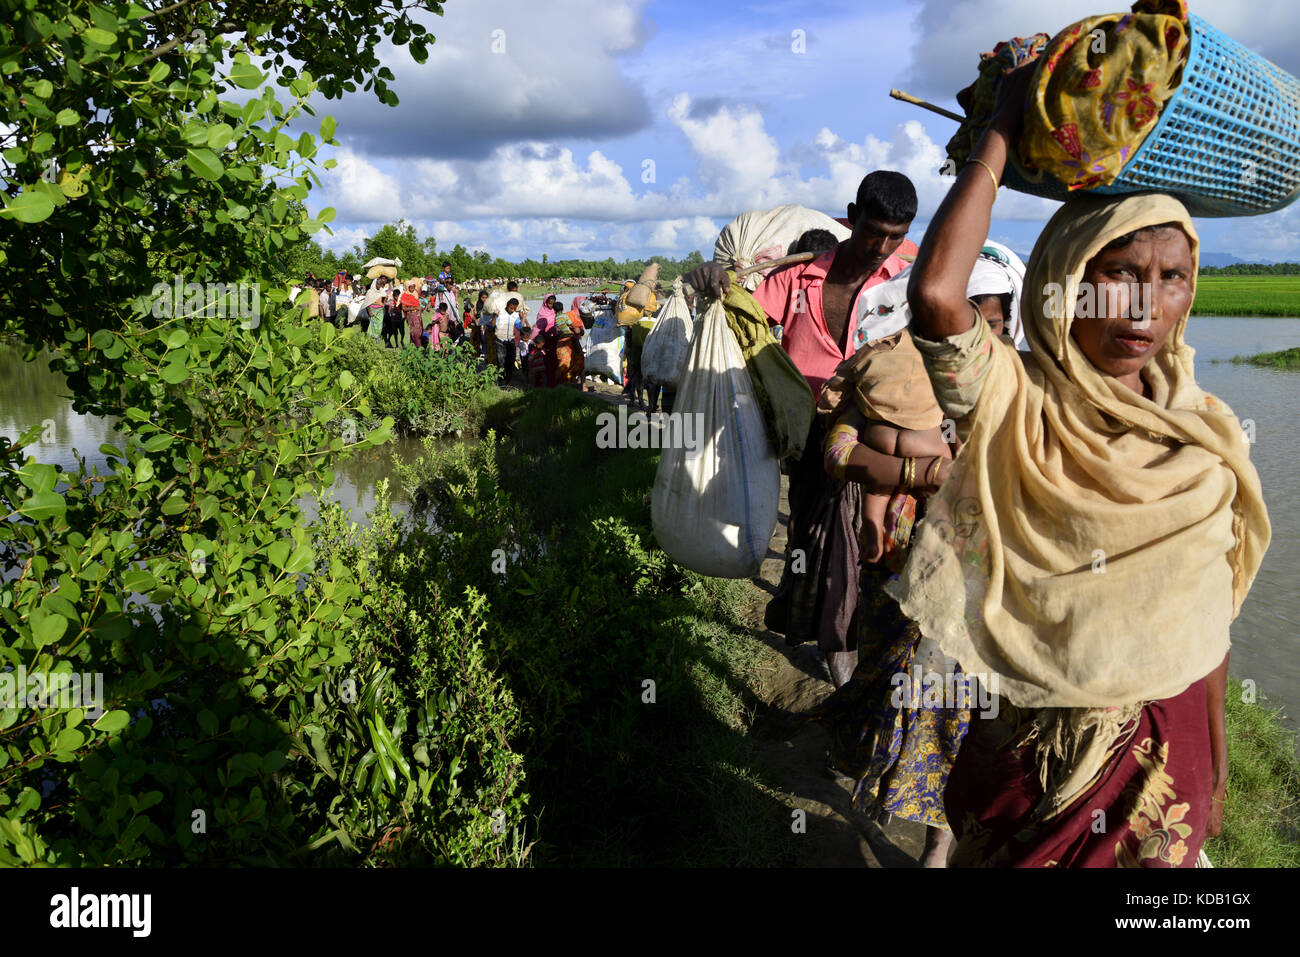 Hundreds of Rohingya people crossing Bangladesh's border as they flee from Buchidong at Myanmar after crossing the Nuf River in Taknuf, Bangladesh. Stock Photo